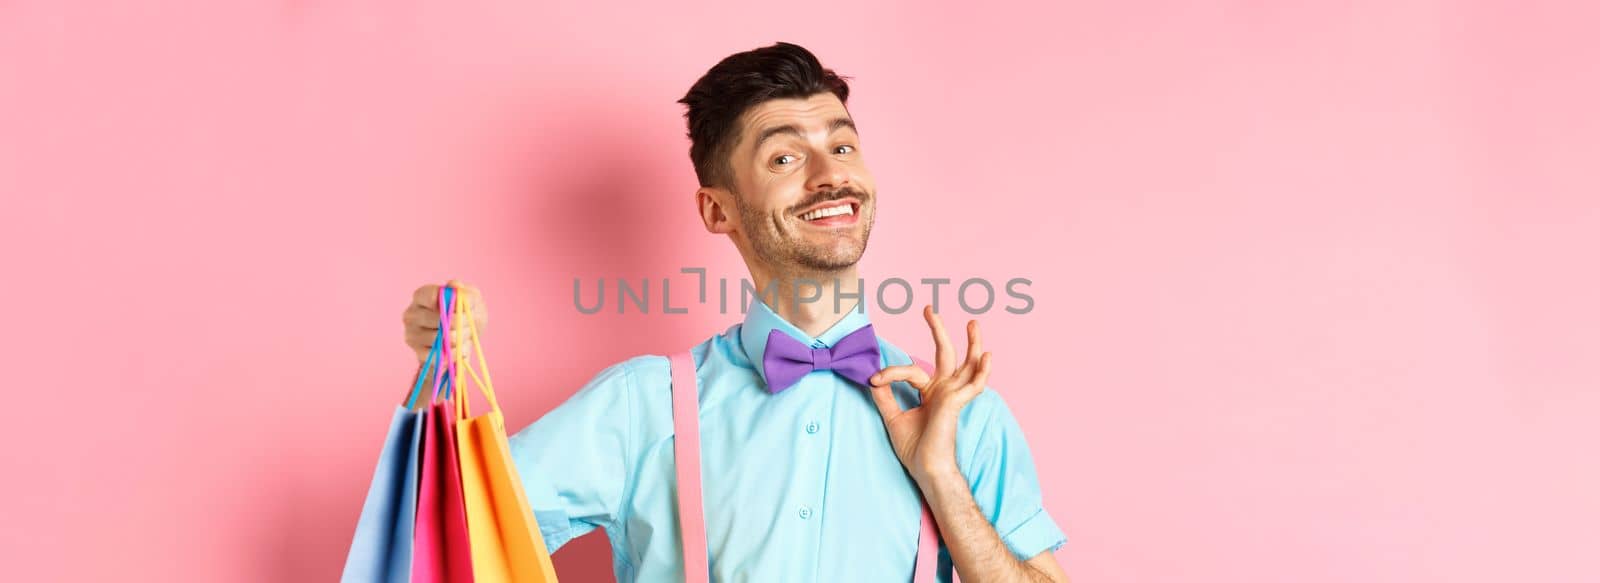 Confident smiling guy adjusting his bow-tie and showing gifts in shopping bags, looking happy, standing over pink background.